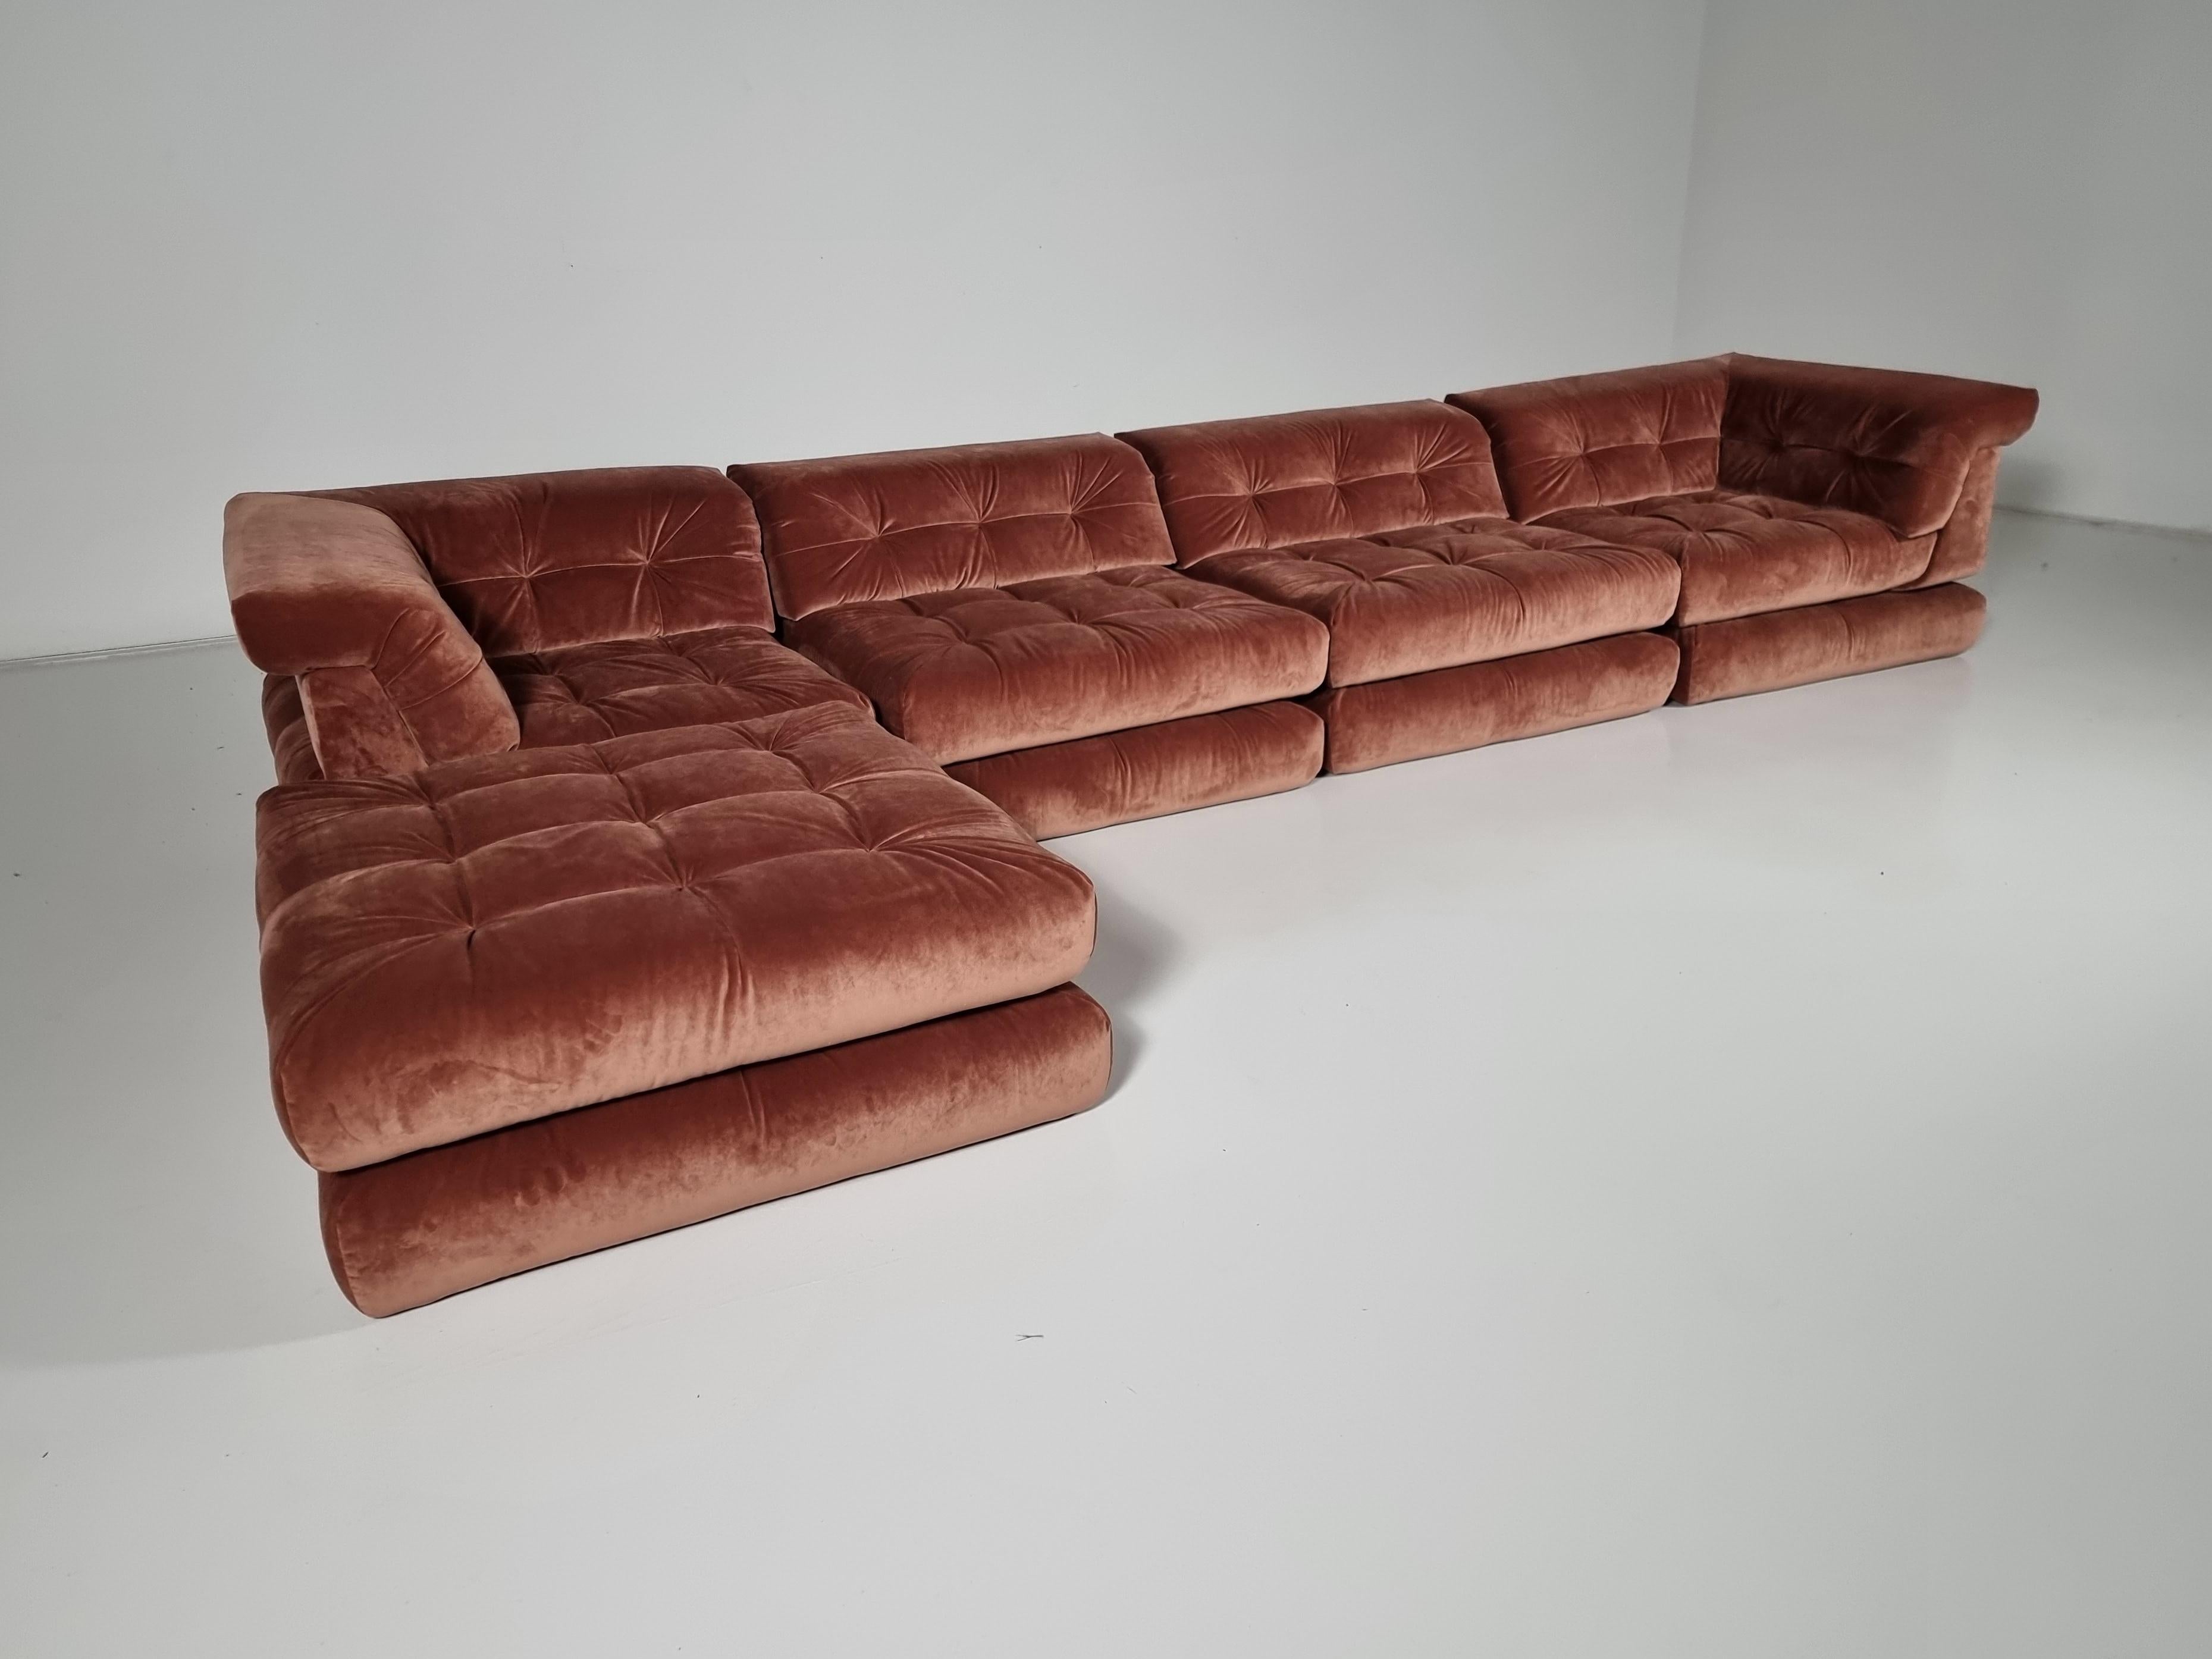 1st edition reupholstered Mah Jong modular sofa set by Hans Hopfer, designed in 1971 for Roche Bobois. It features multiple cushions that can be arranged in an endless number of ways, This set includes 10 cushions and 4 backrests. 

Hopfer’s Mah